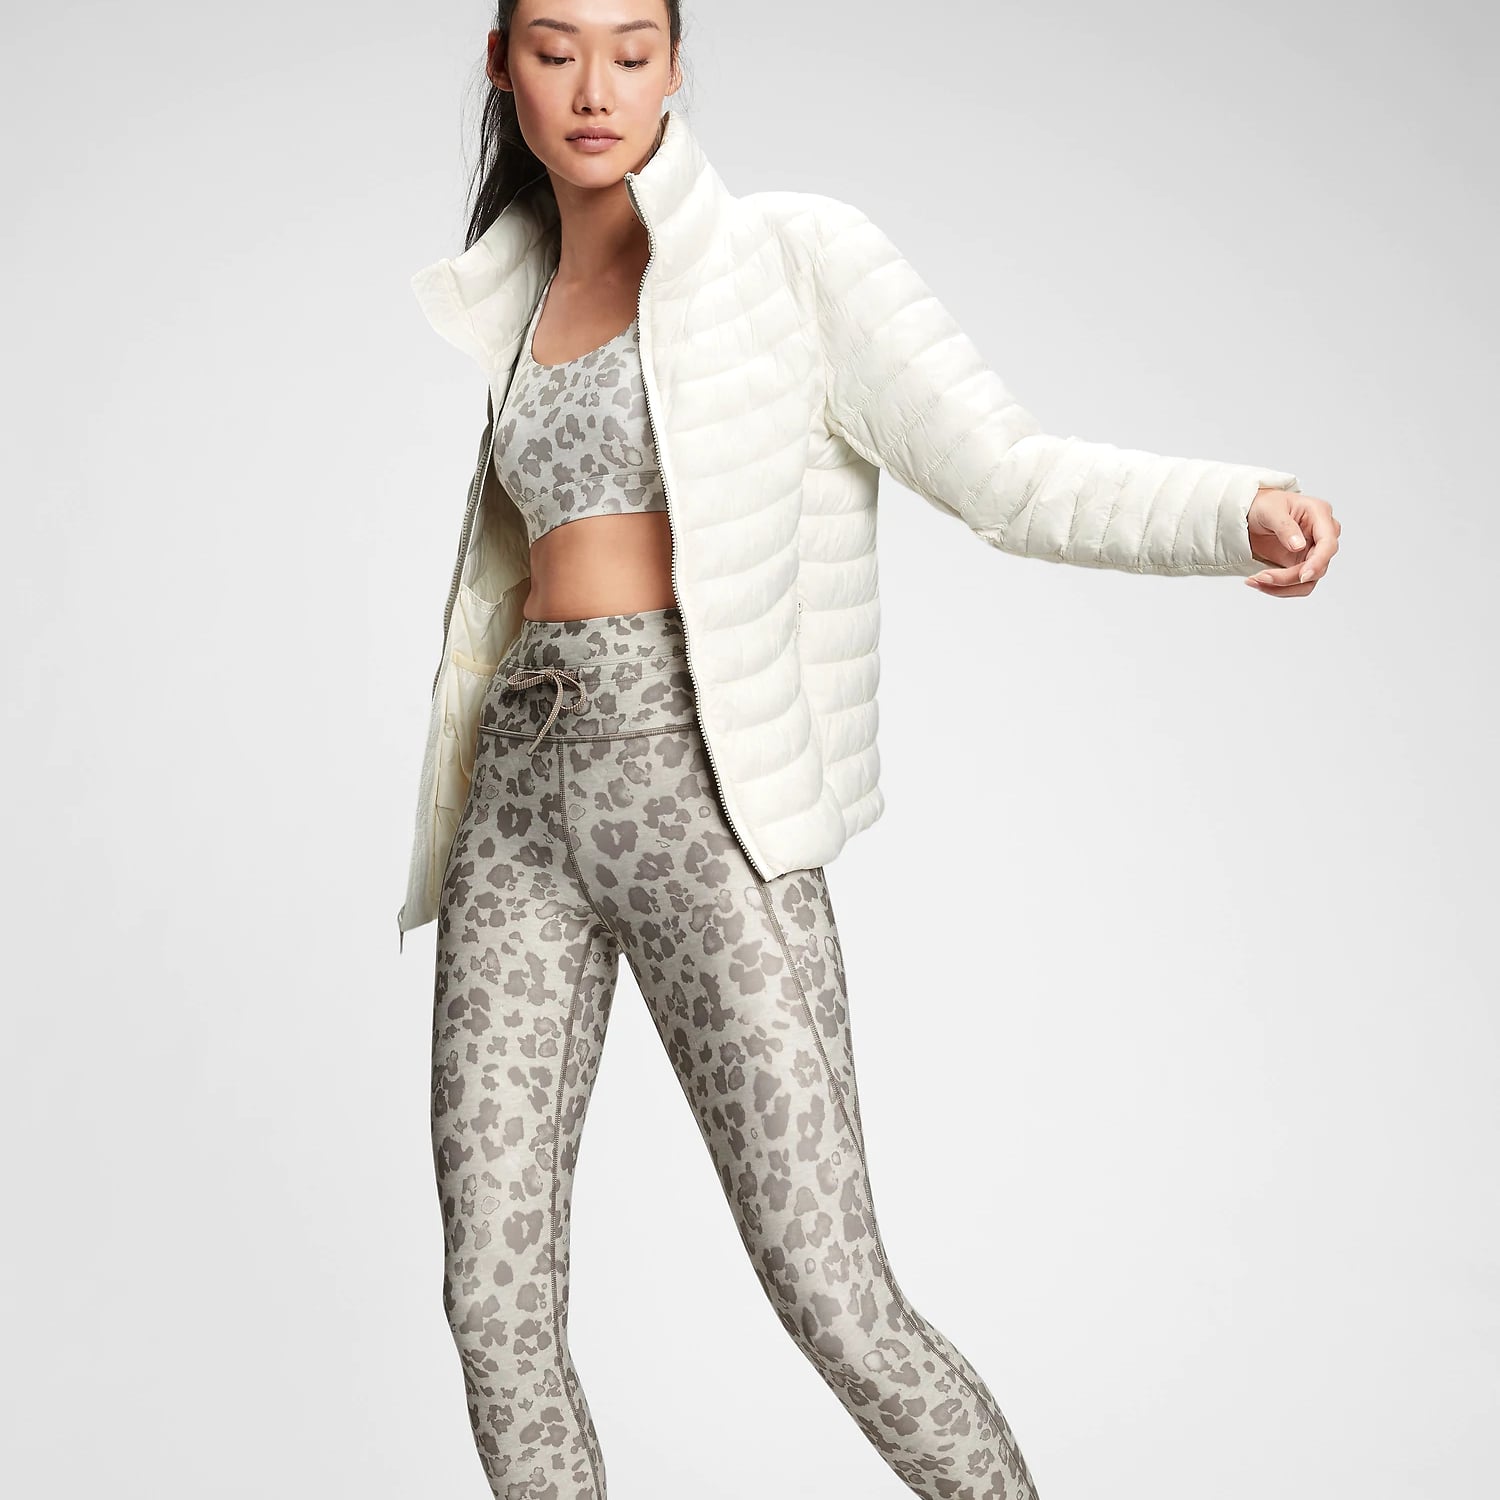 Buy Gap High Waisted 7/8 Leggings from the Gap online shop